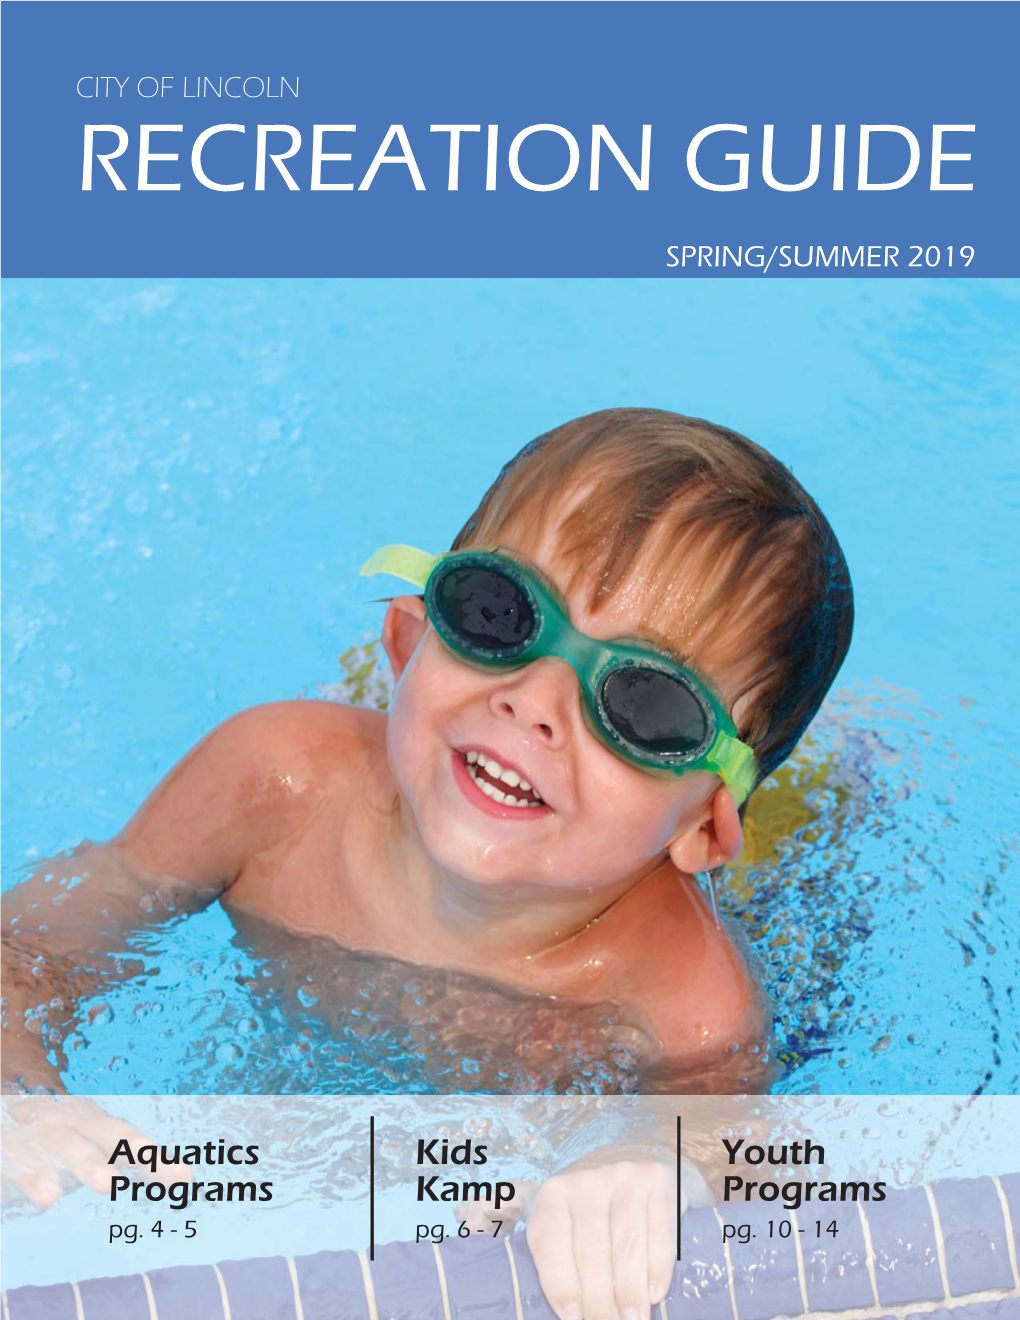 Spring-Summer 2019 Recreation Guide Template.Indd